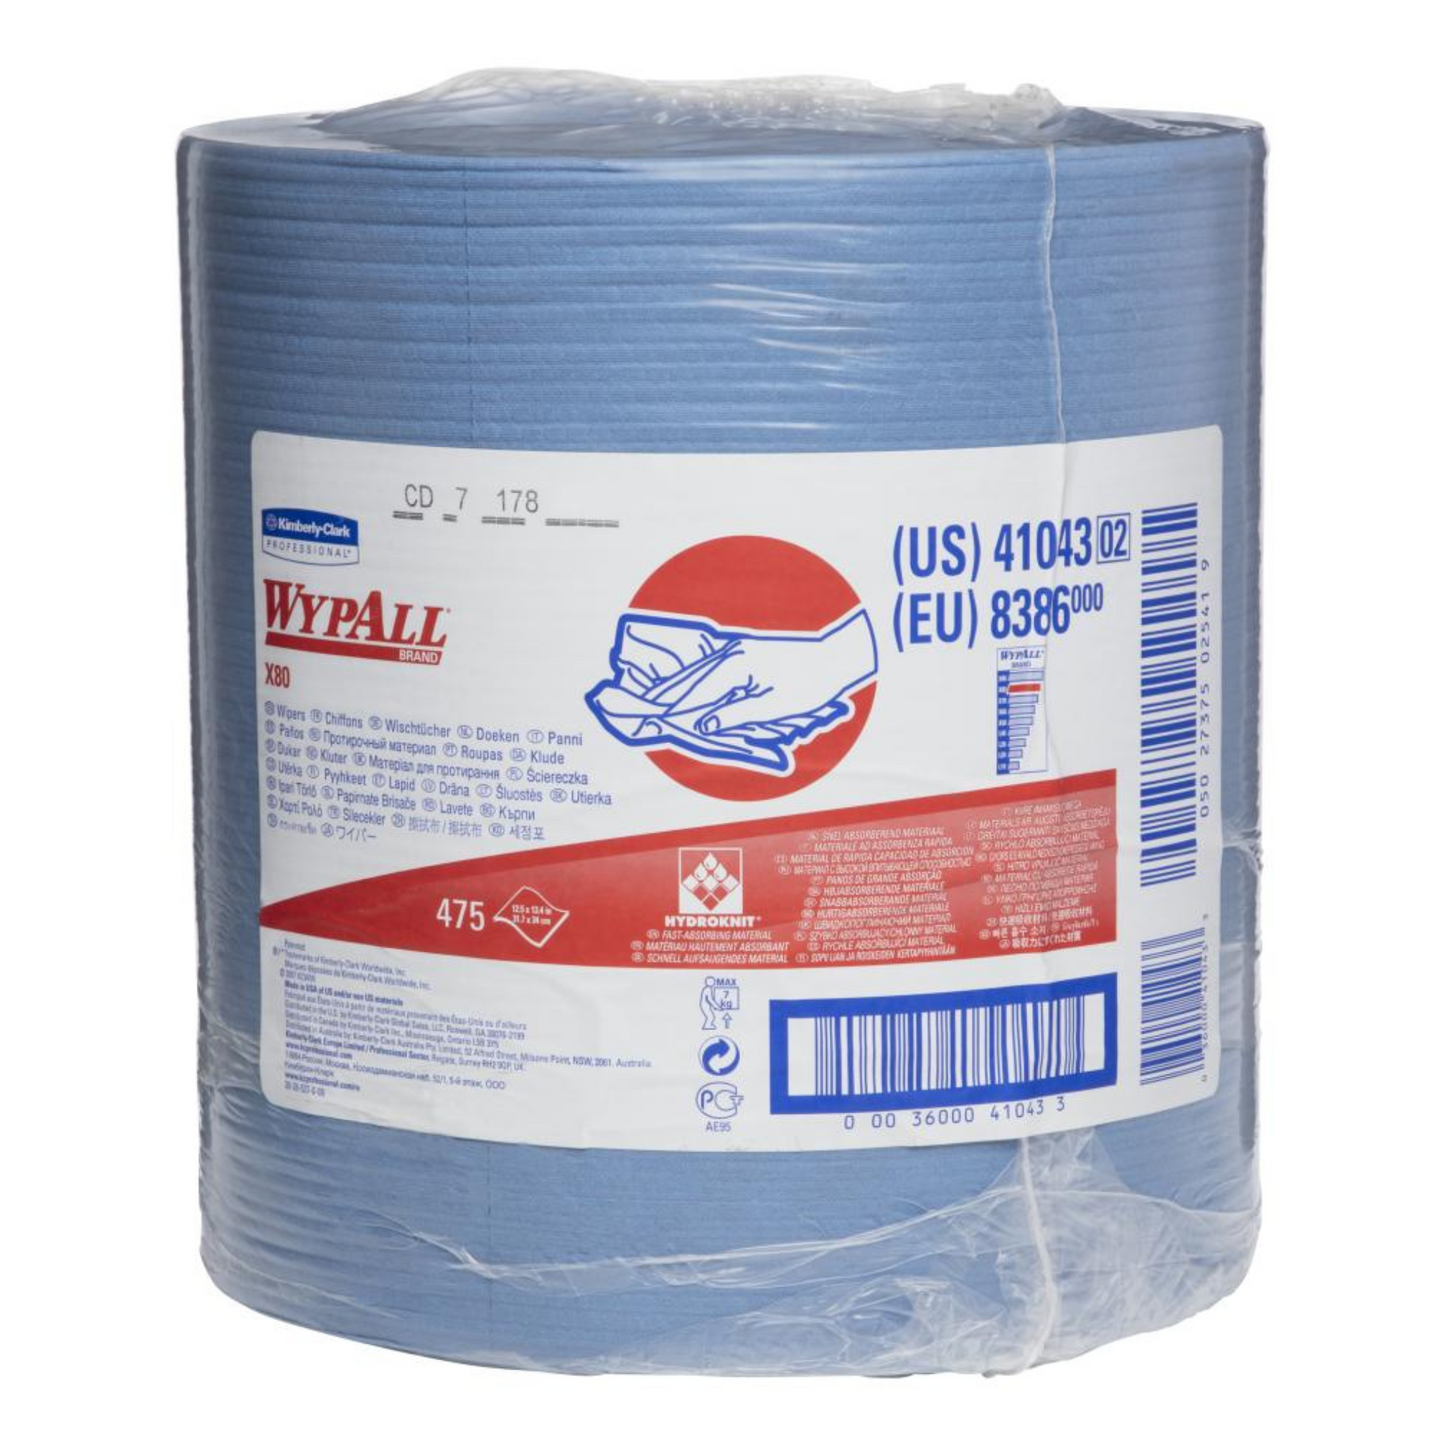 Wypall X80 Perforated Blue Jumbo - Roll (475pc)